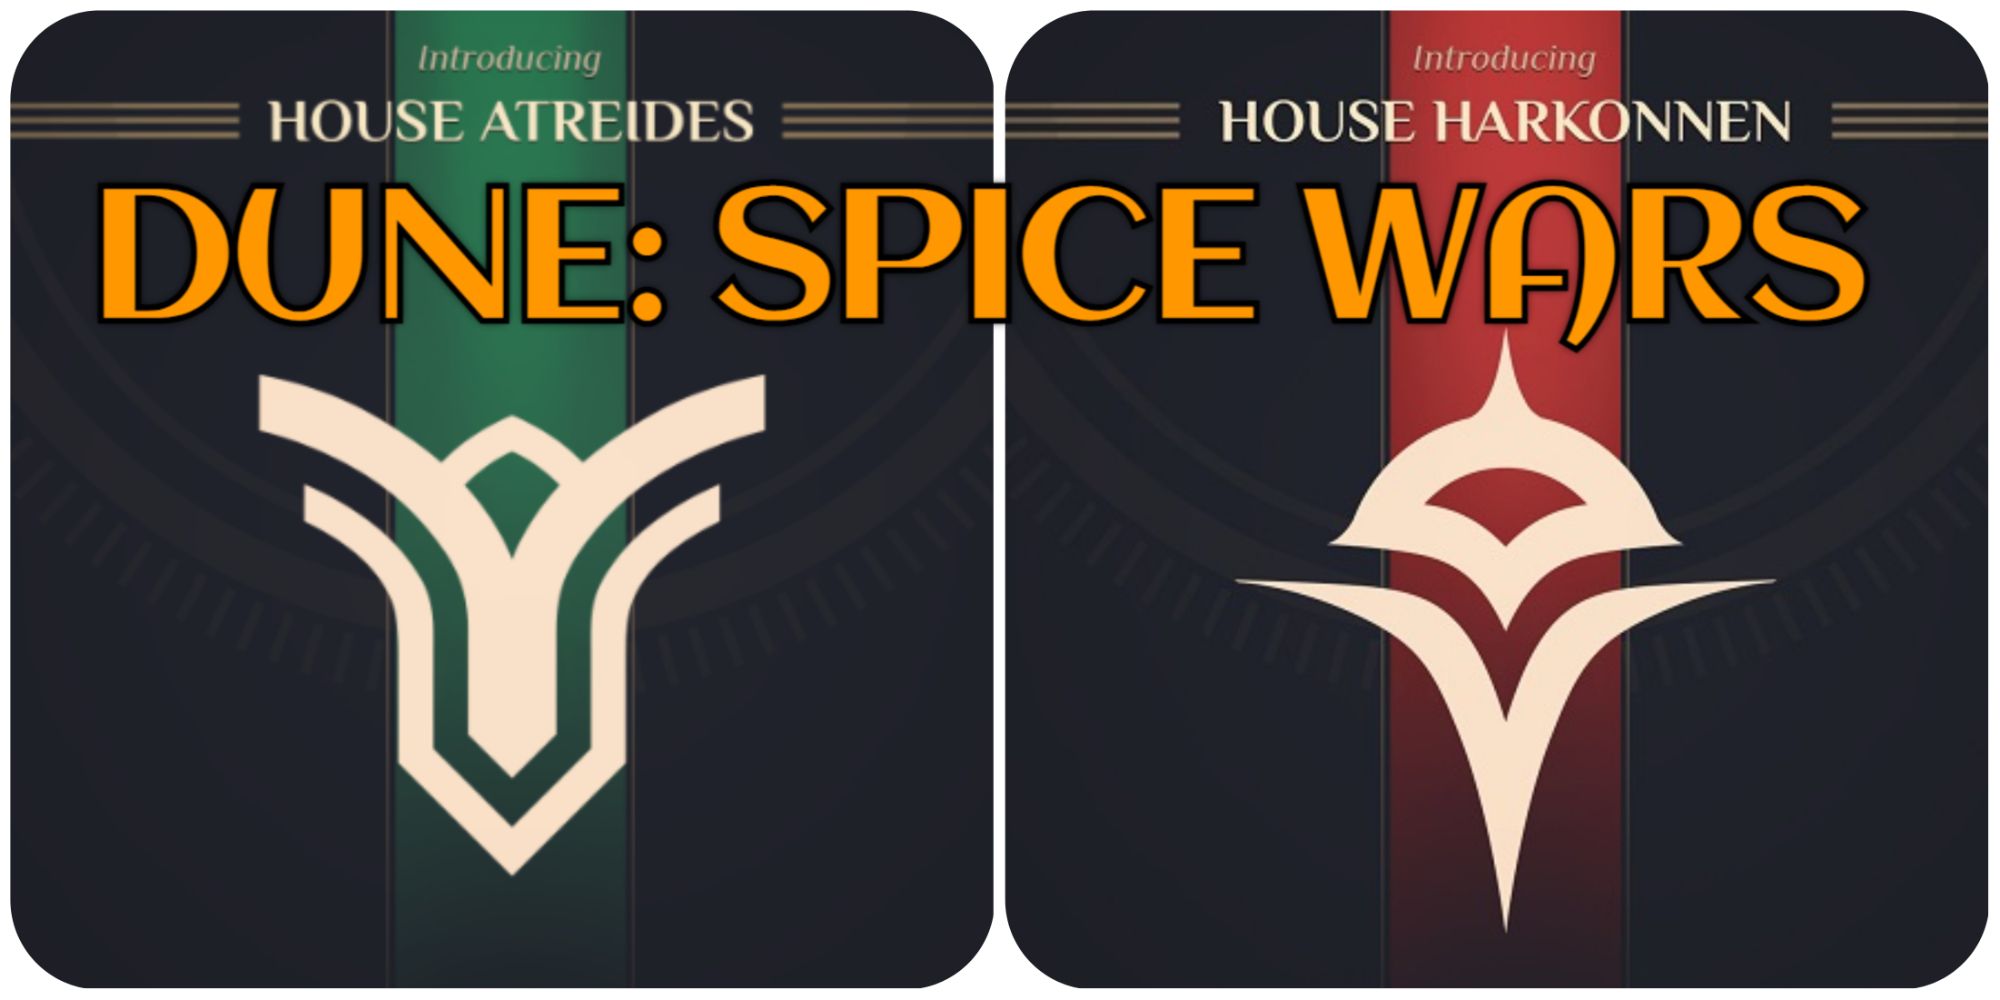 Banner for Dune Spice Wars showing House Atreides and House Harkonnen